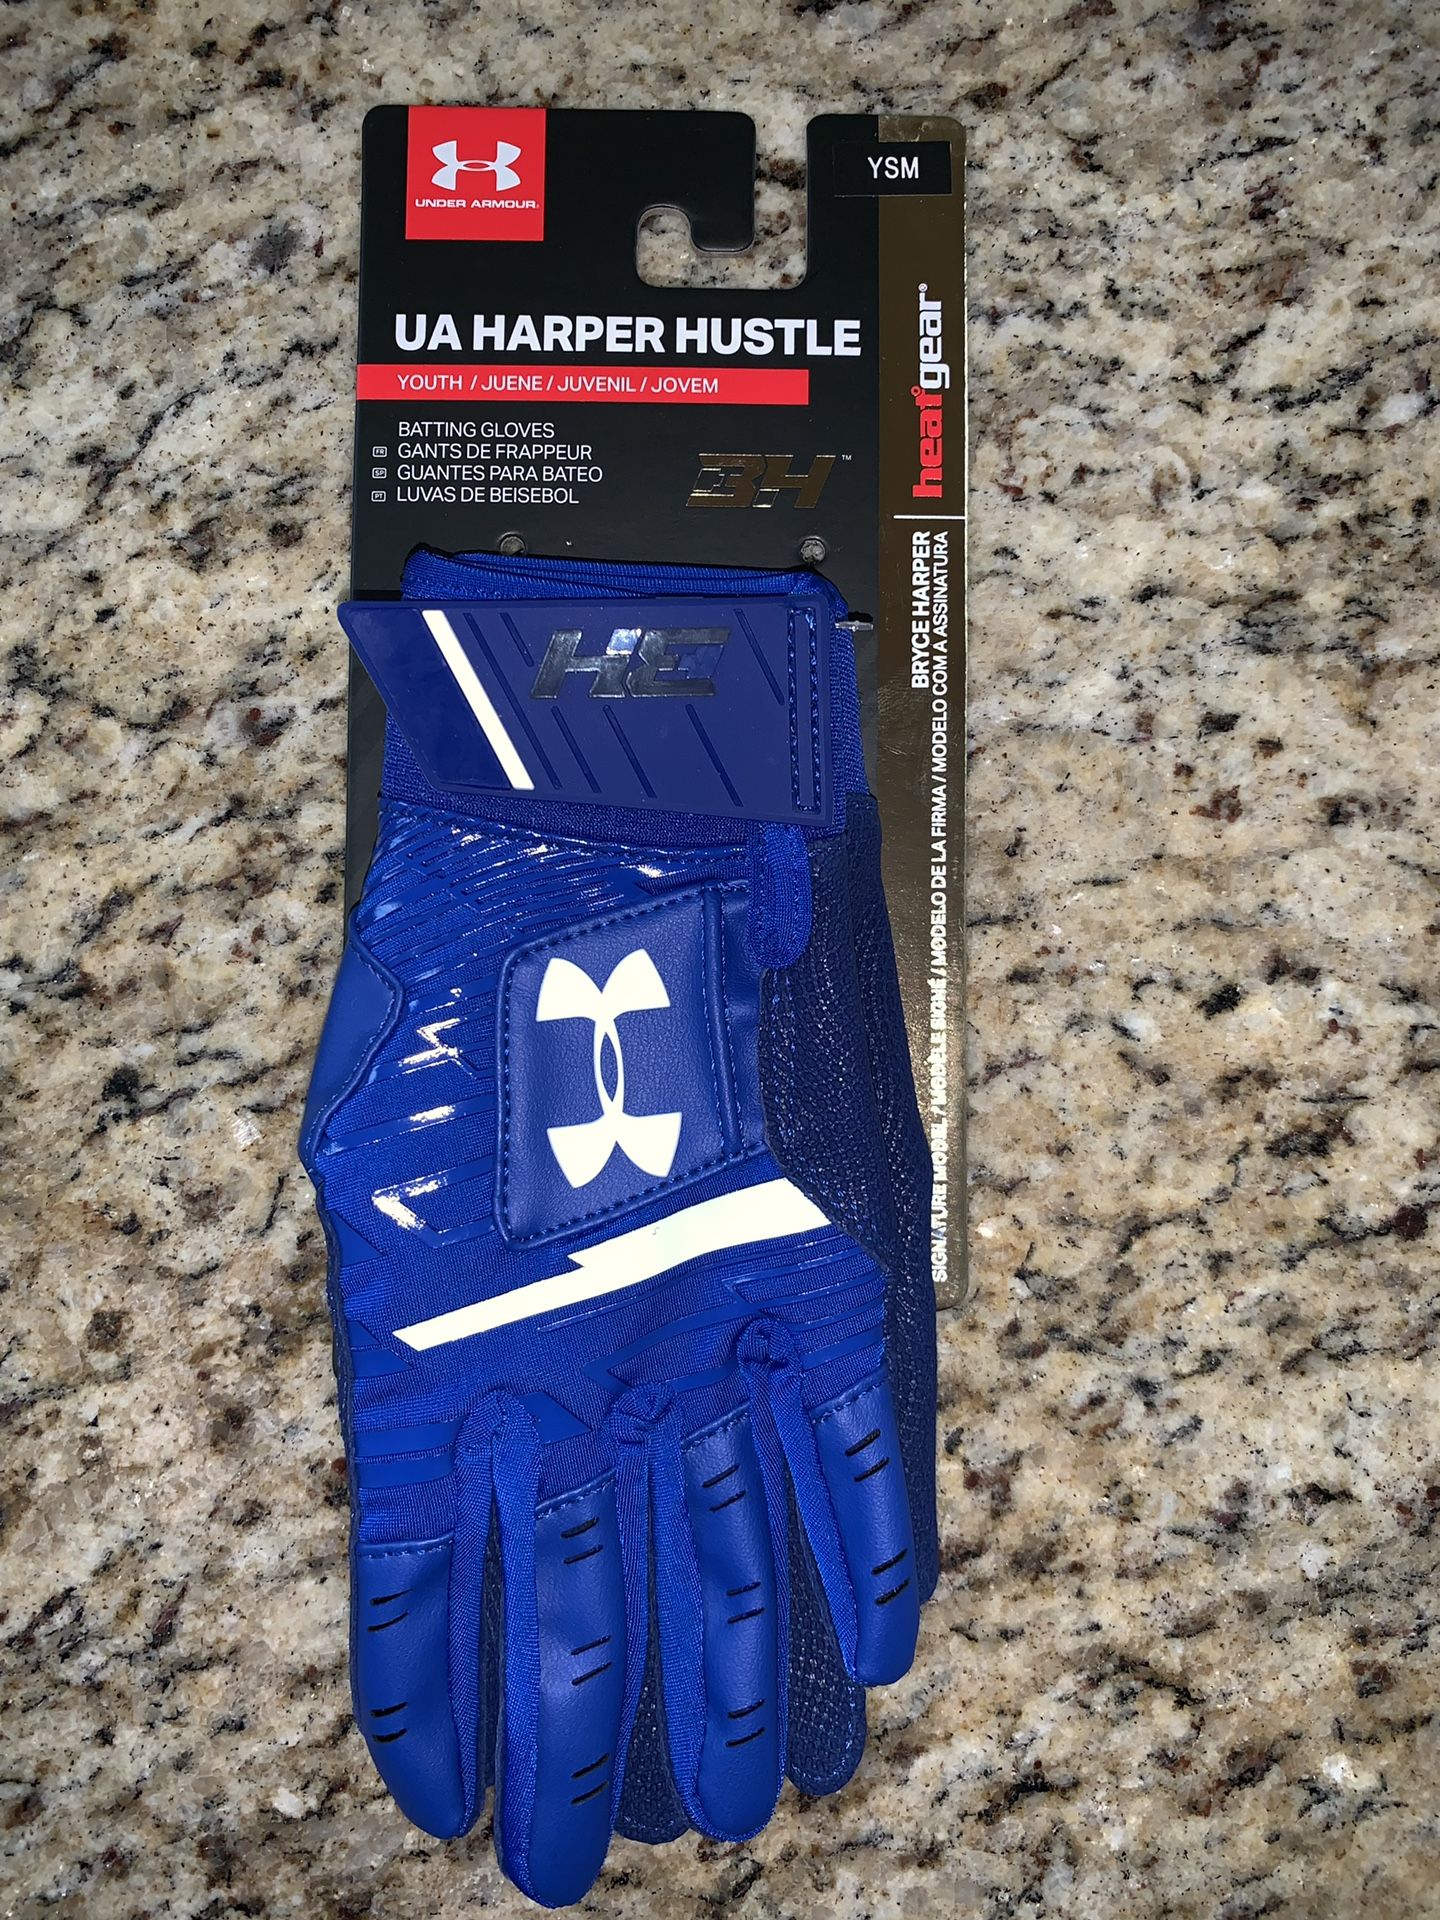 New Under Armour Harper Hustle Youth Baseball Batting Gloves Royal Blue Size Small